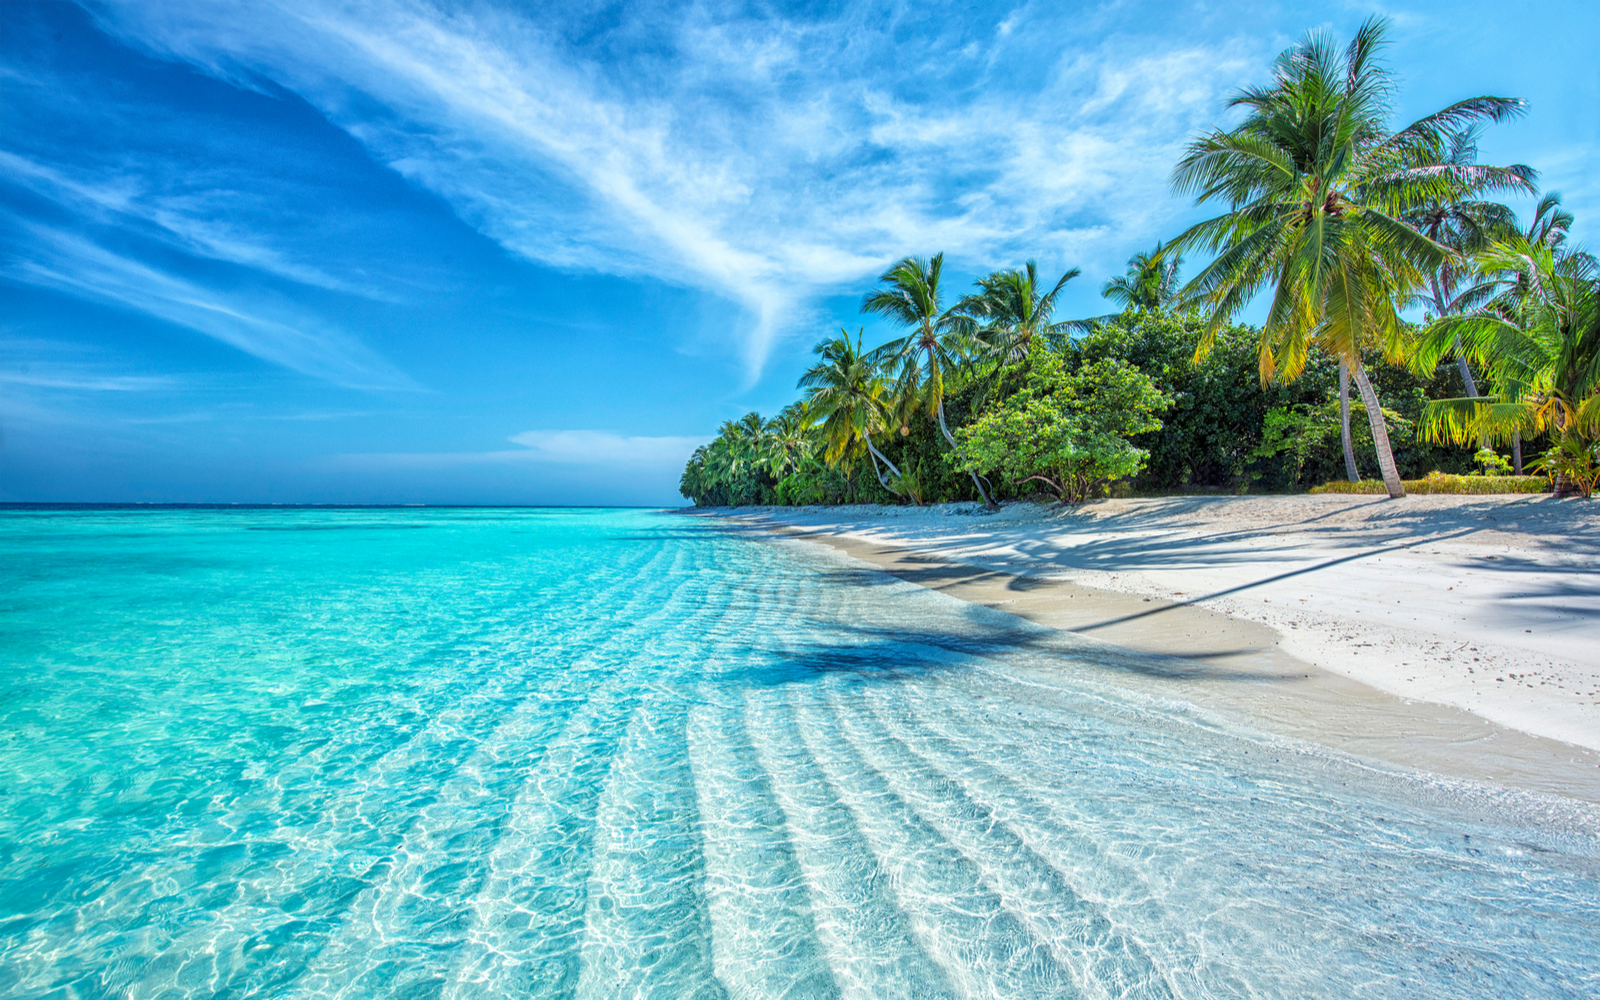 The Best Time to Visit Maldives in 2022